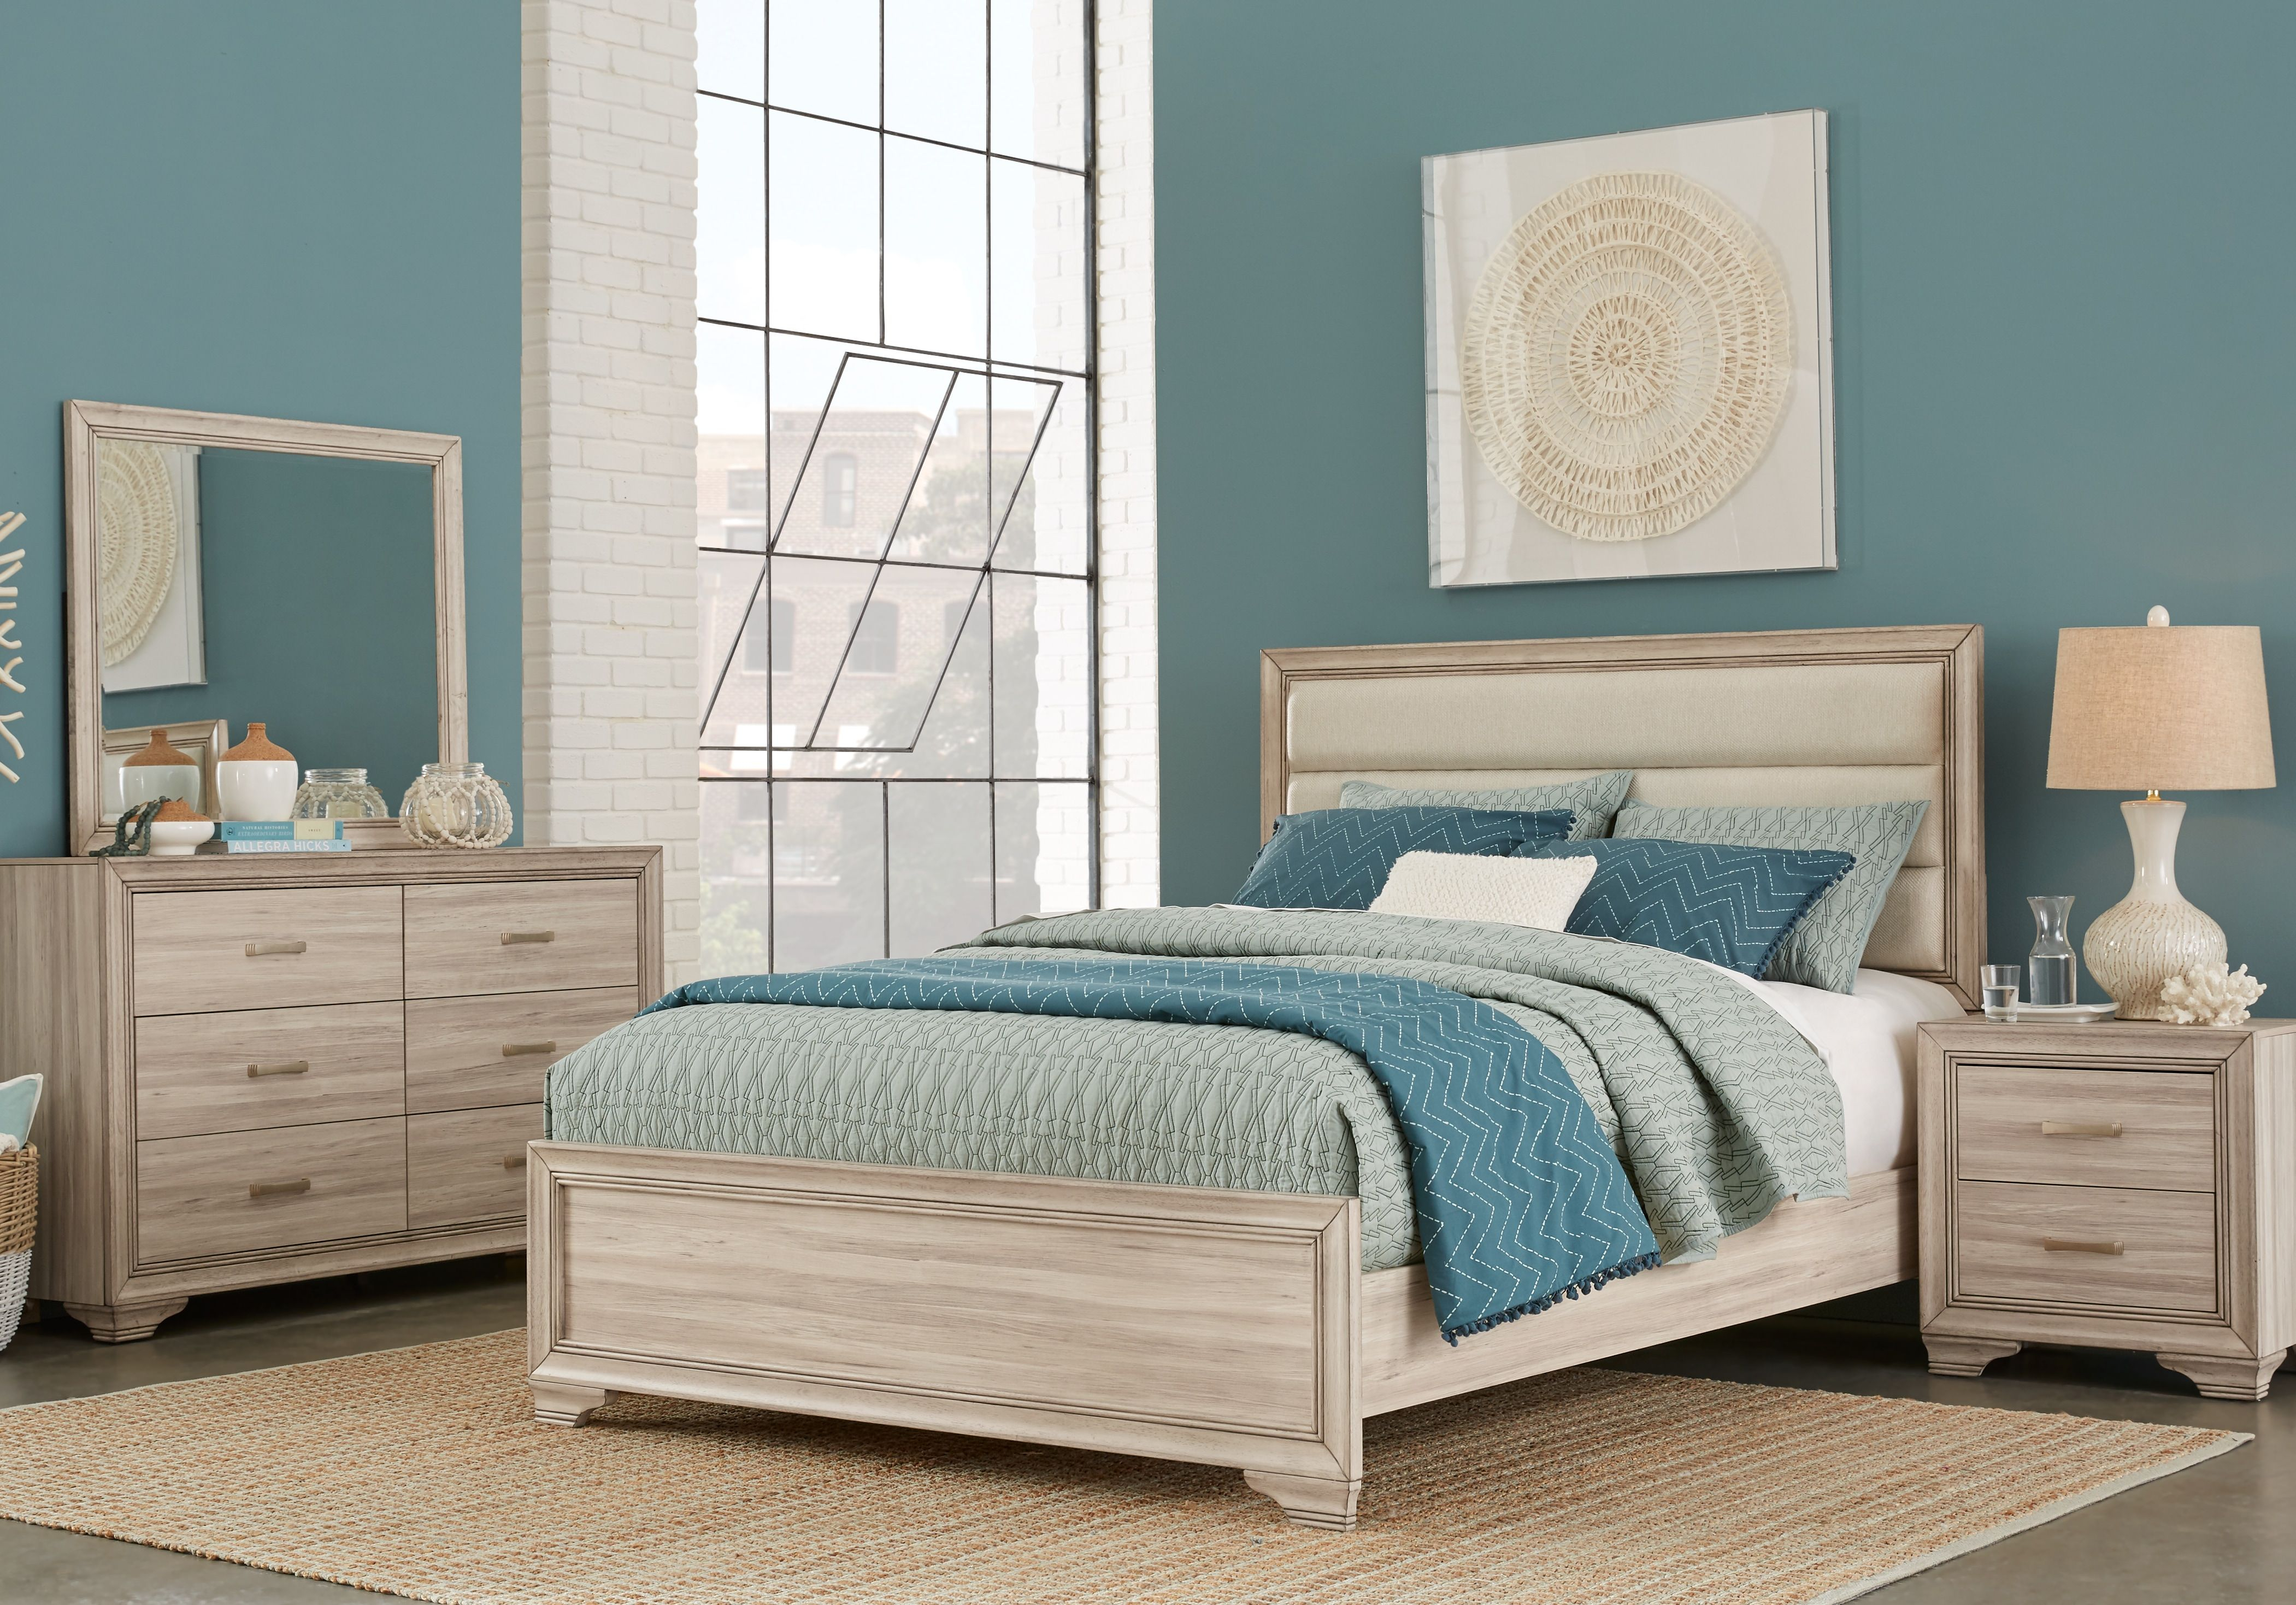 Marlow Natural 7 Pc Queen Panel Bedroom In 2019 Bedset Wood throughout sizing 4202 X 2937